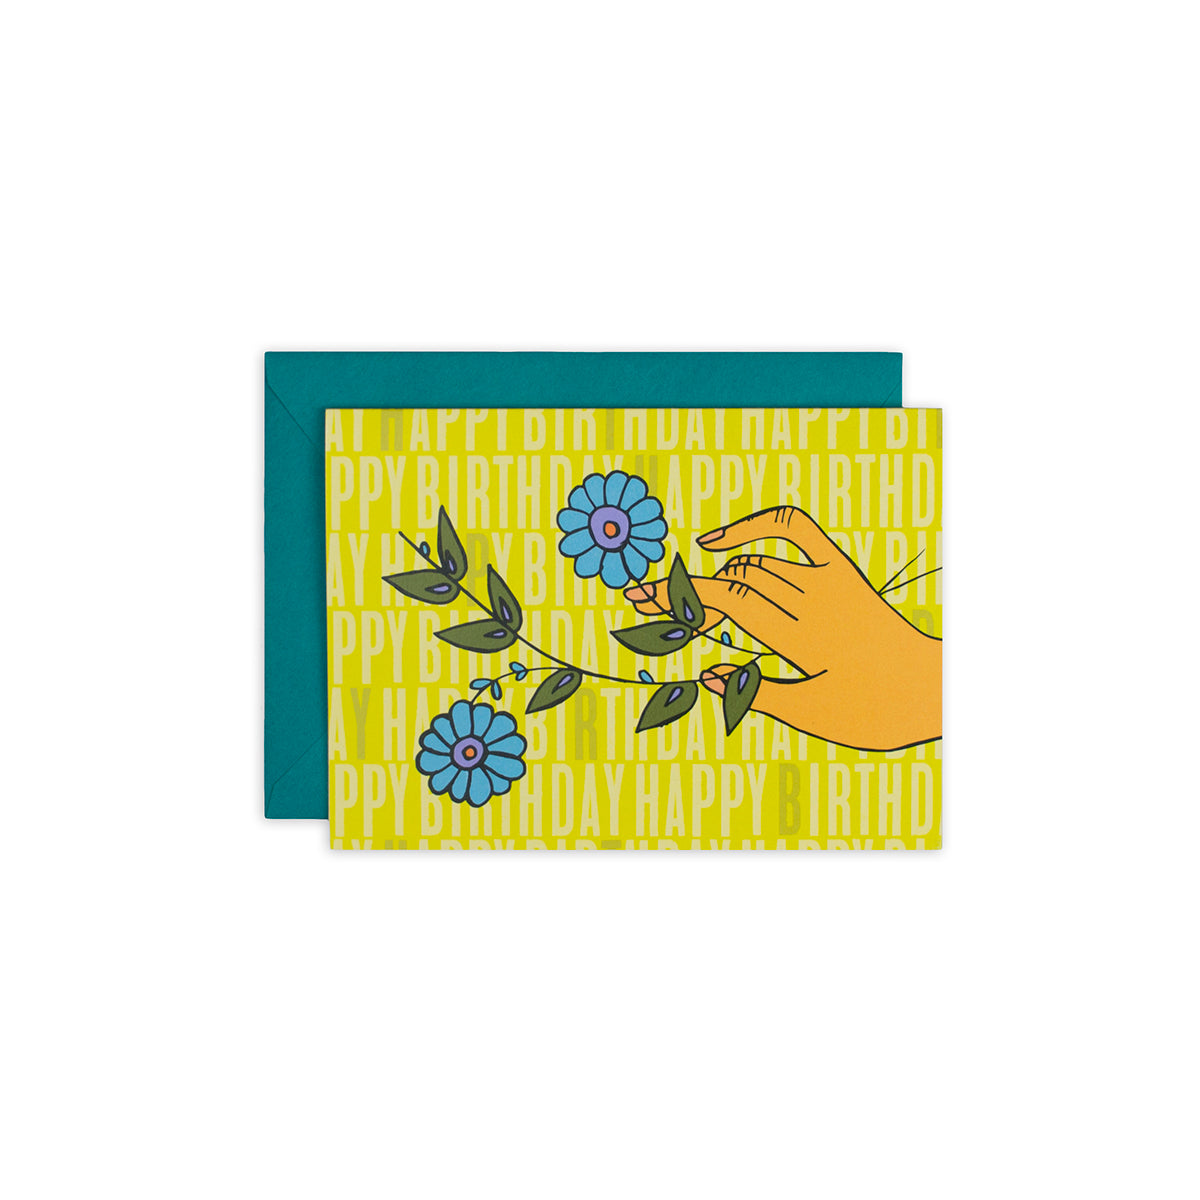 Illustration of hand holding a couple of daisies; 'happy birthday' text pattern in background, in green